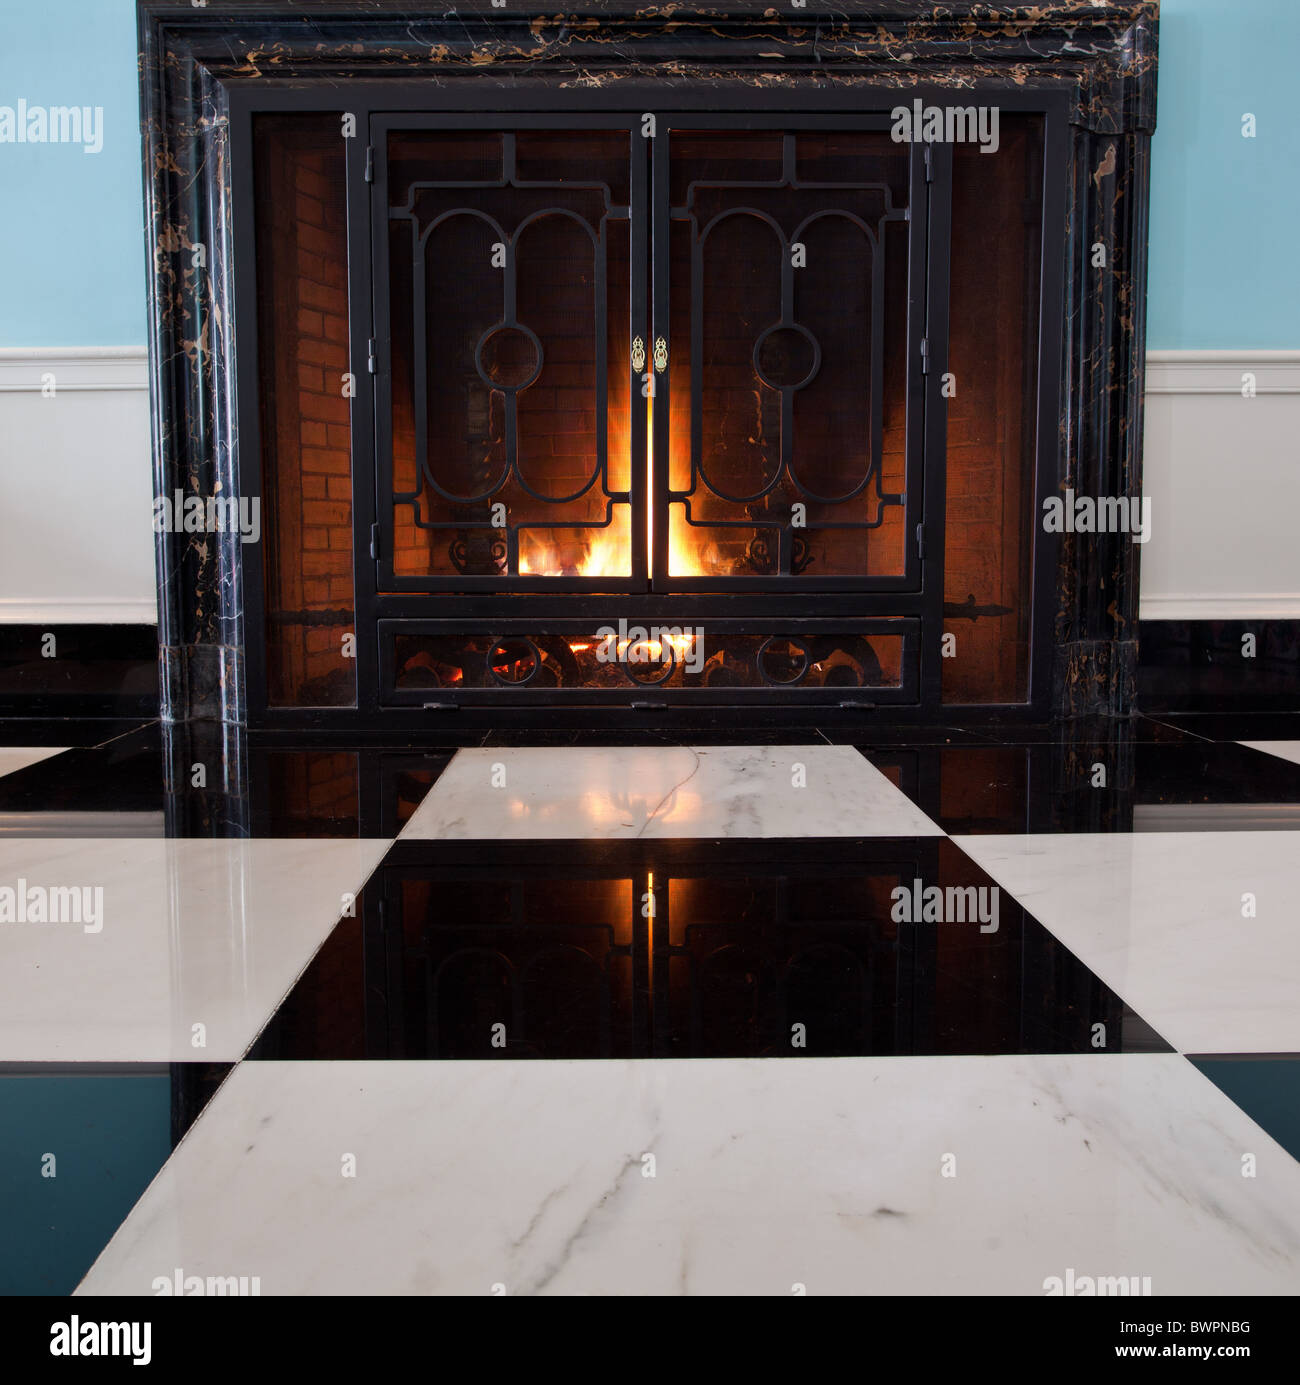 - hi-res antique fire Fireplace and stock logs Alamy images photography